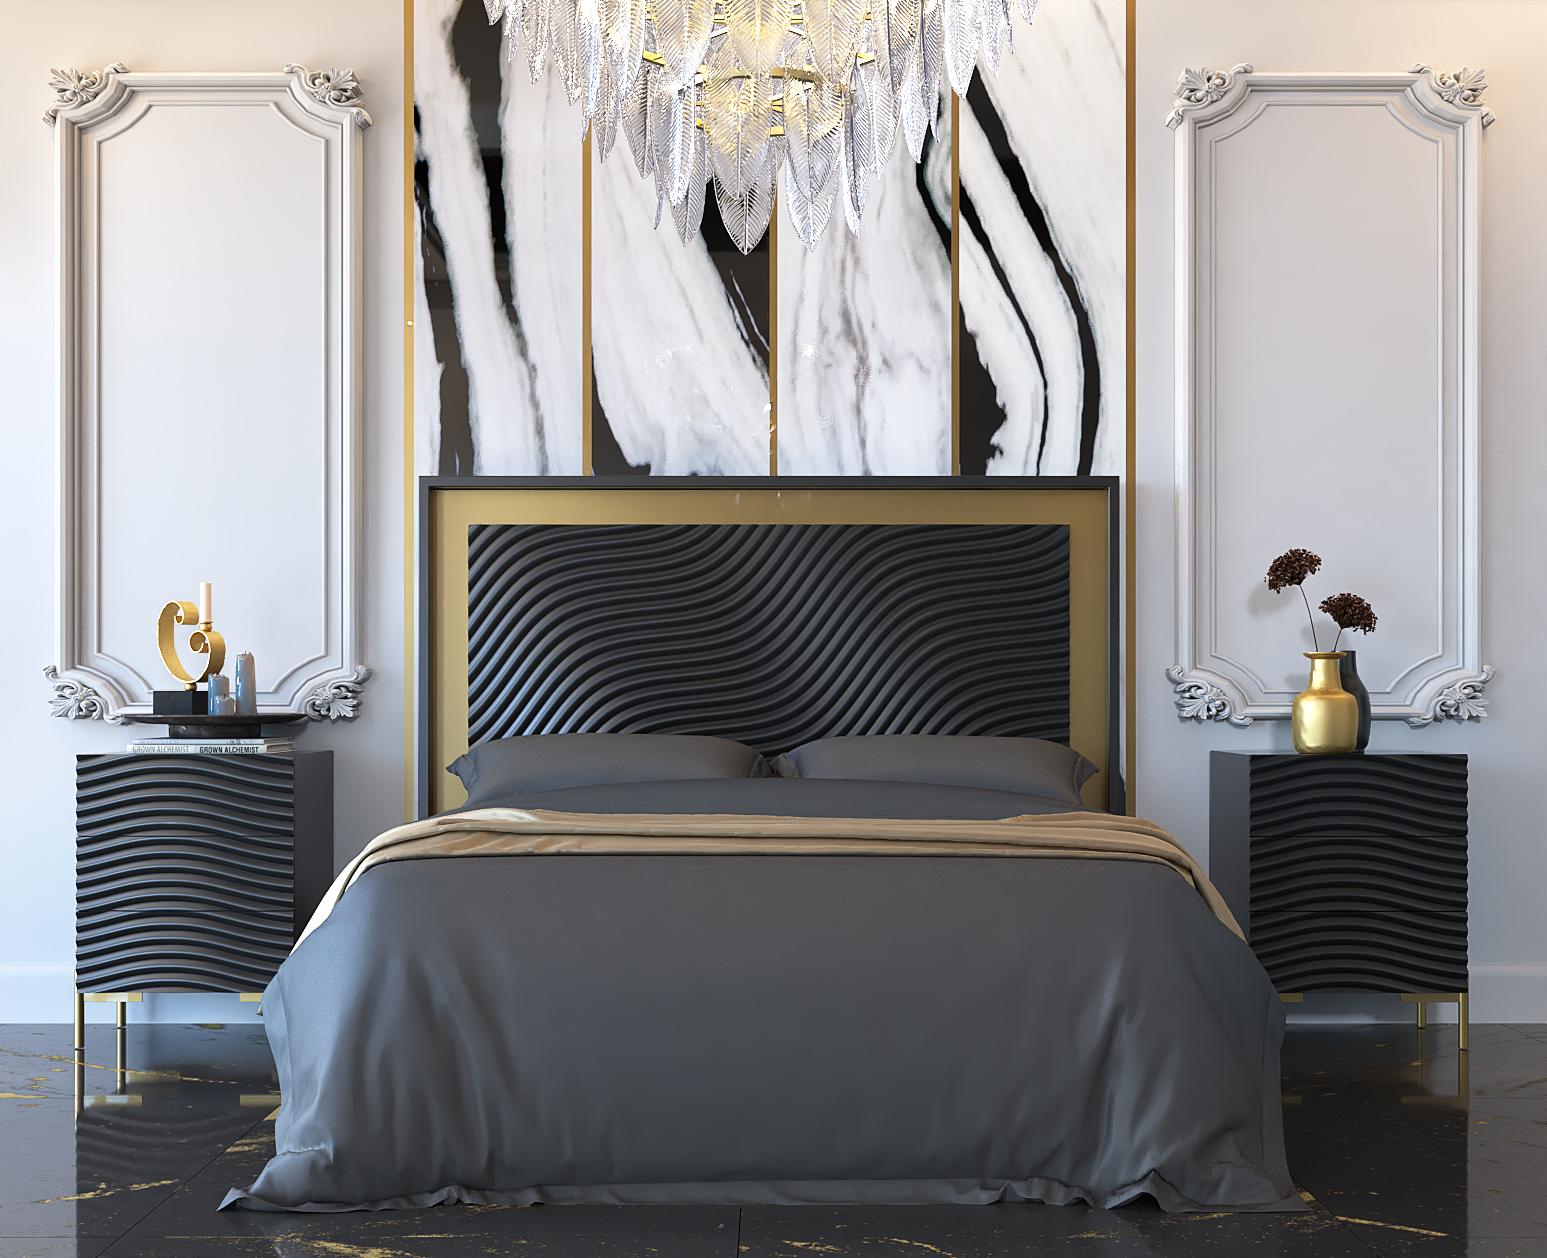 

    
Glam Shiny Dark Grey King Bedroom Set 3Pcs WAVE ESF Contemporary MADE IN SPAIN
